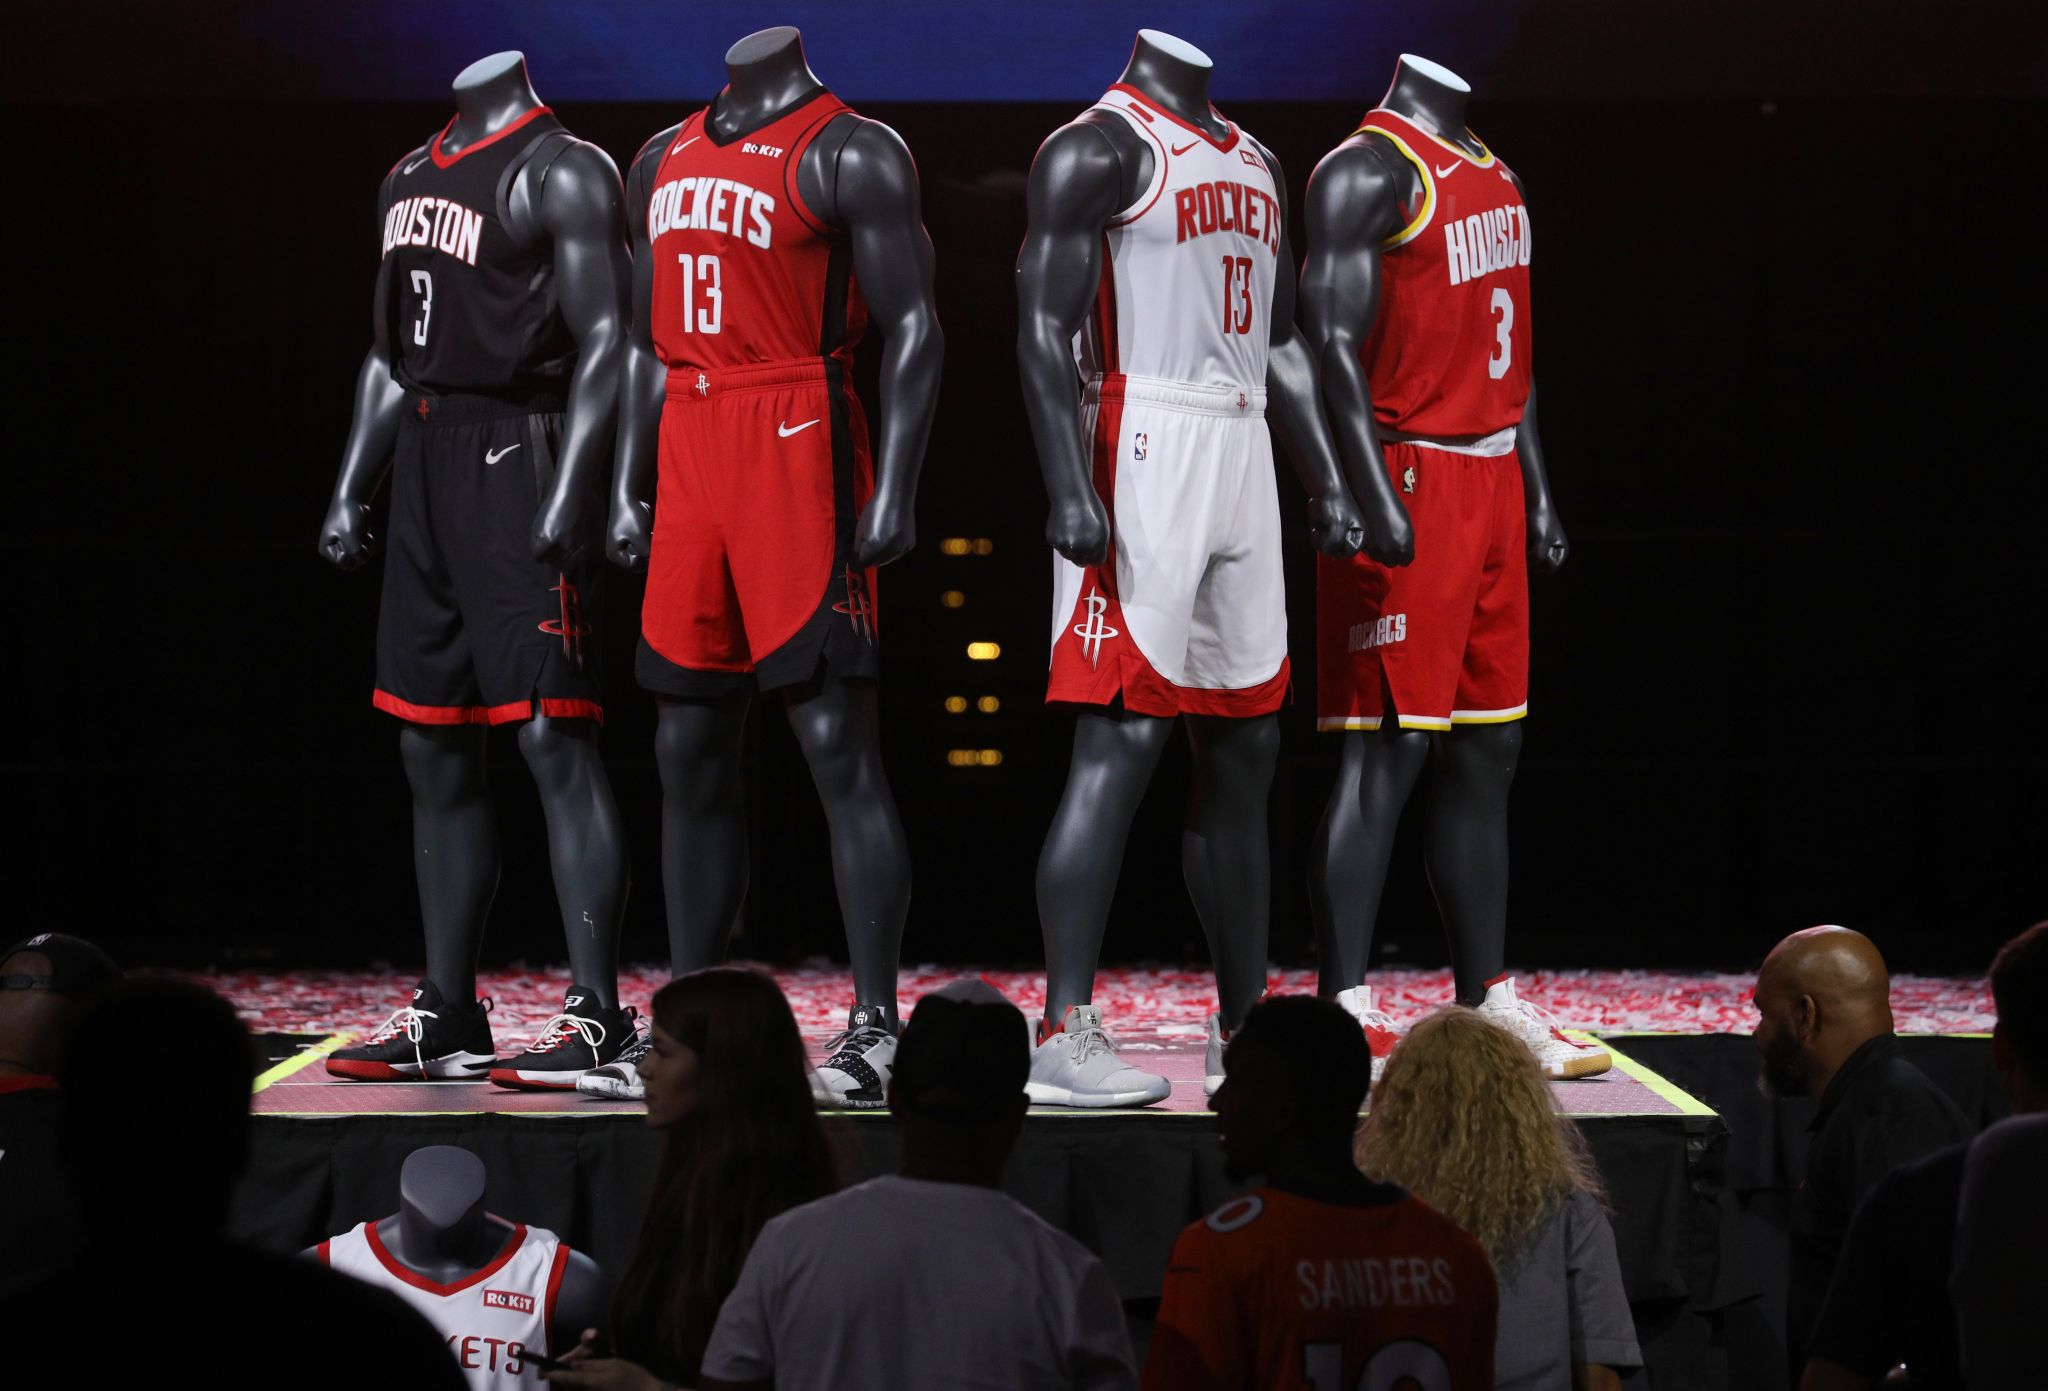 Throwback jersey gives Rockets fans championship buzz